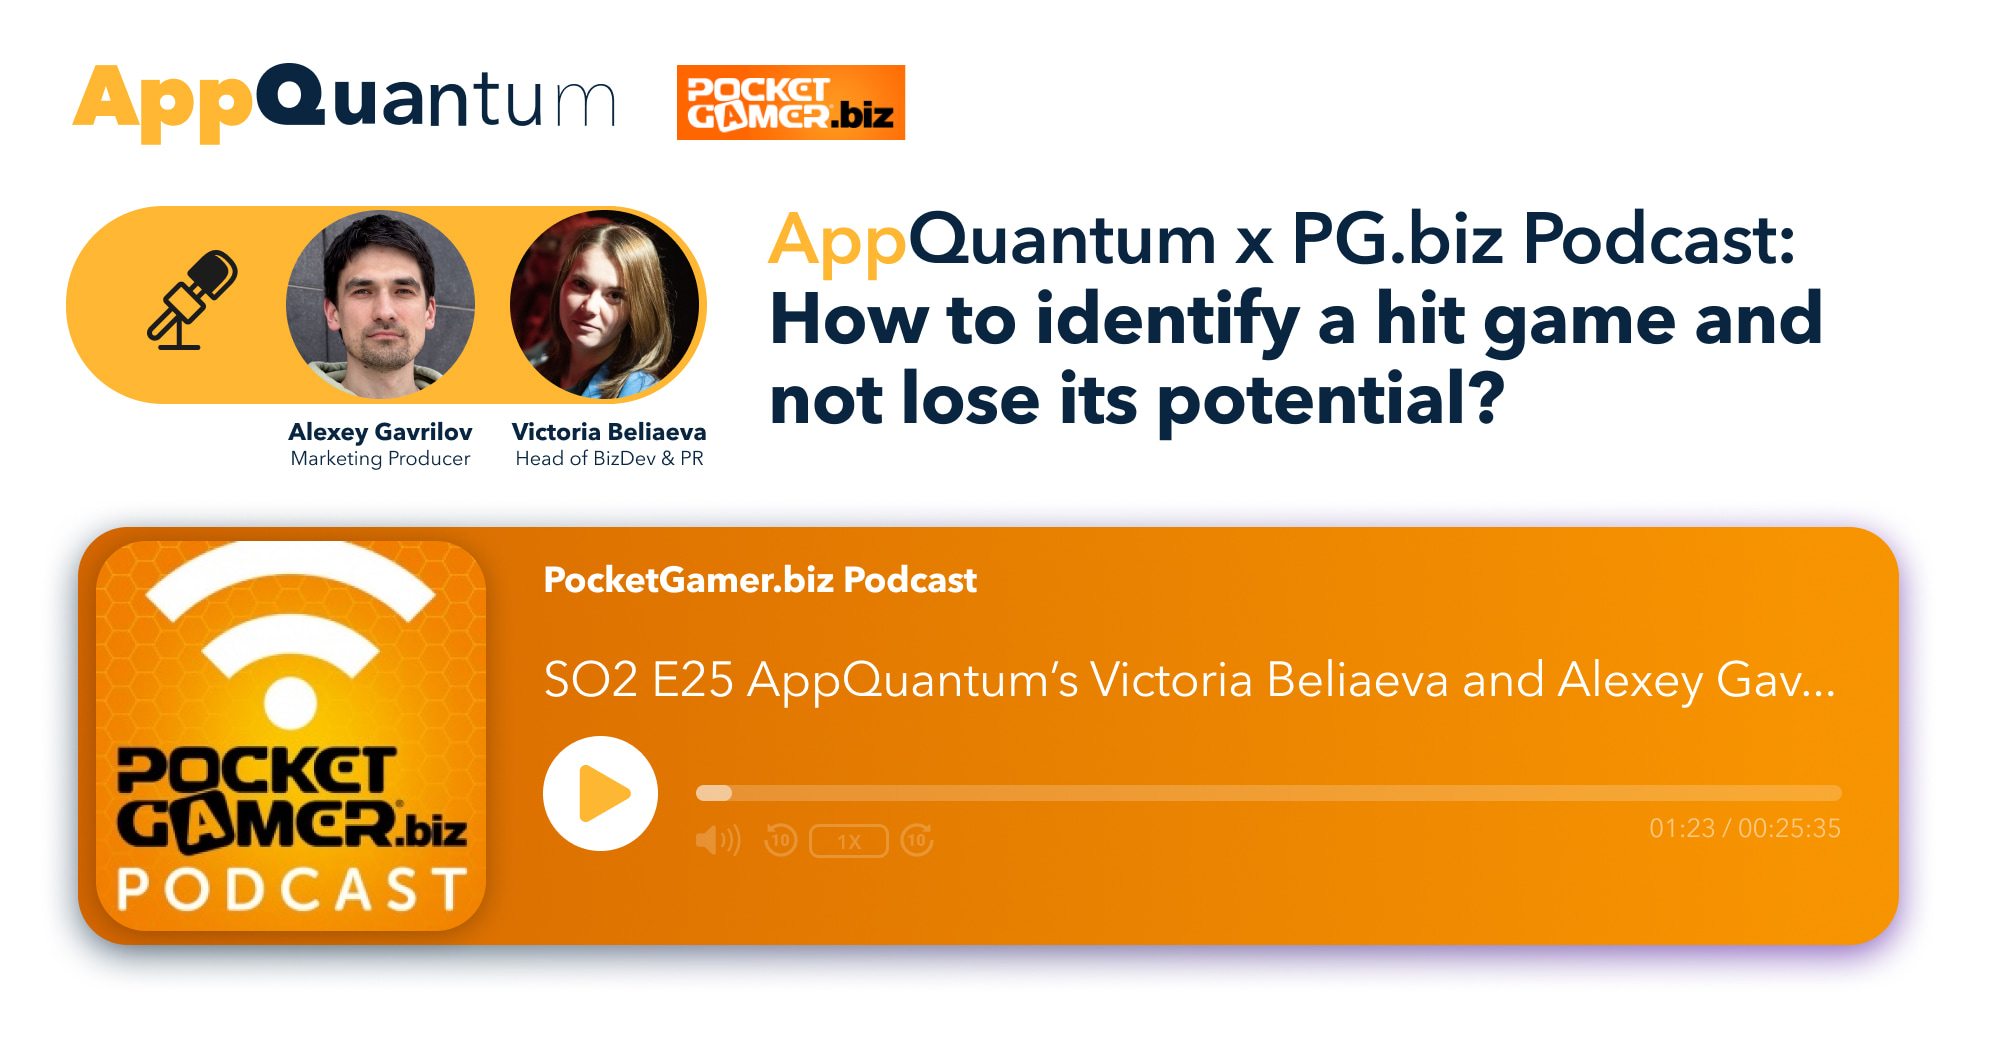 AppQuantum x PG.biz Podcast: How to Identify a Hit Game and not Lose its Potential?